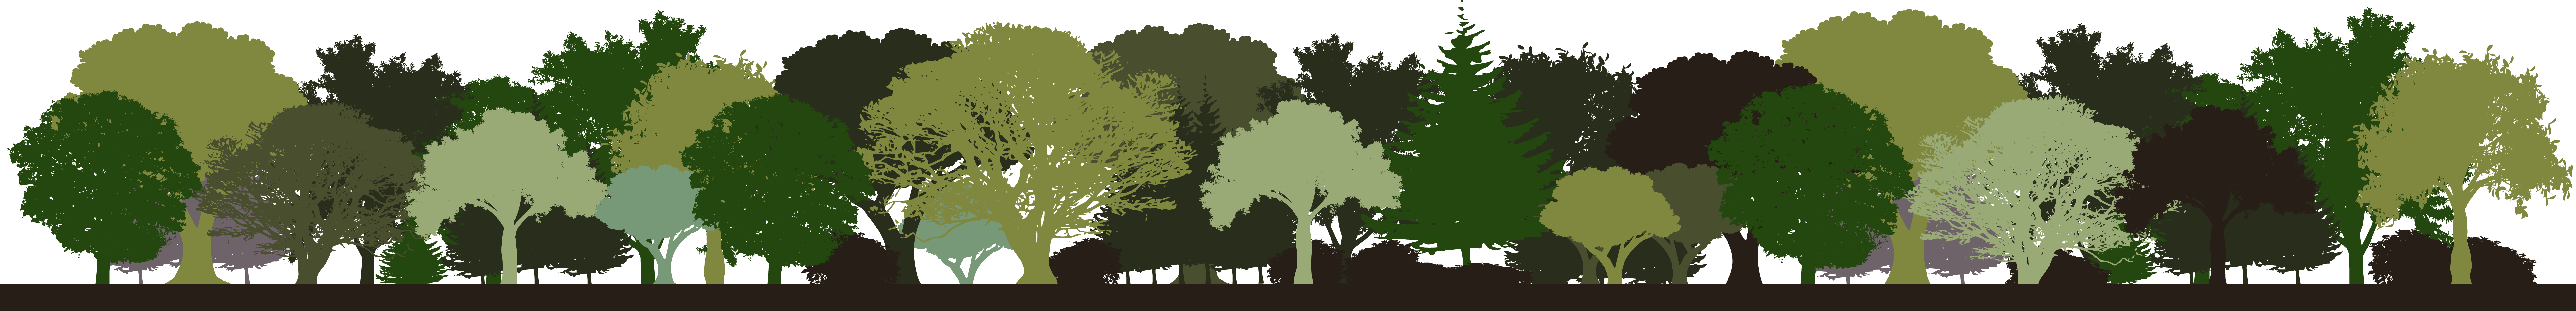 Footer: silhouette of a forest in many layered greens